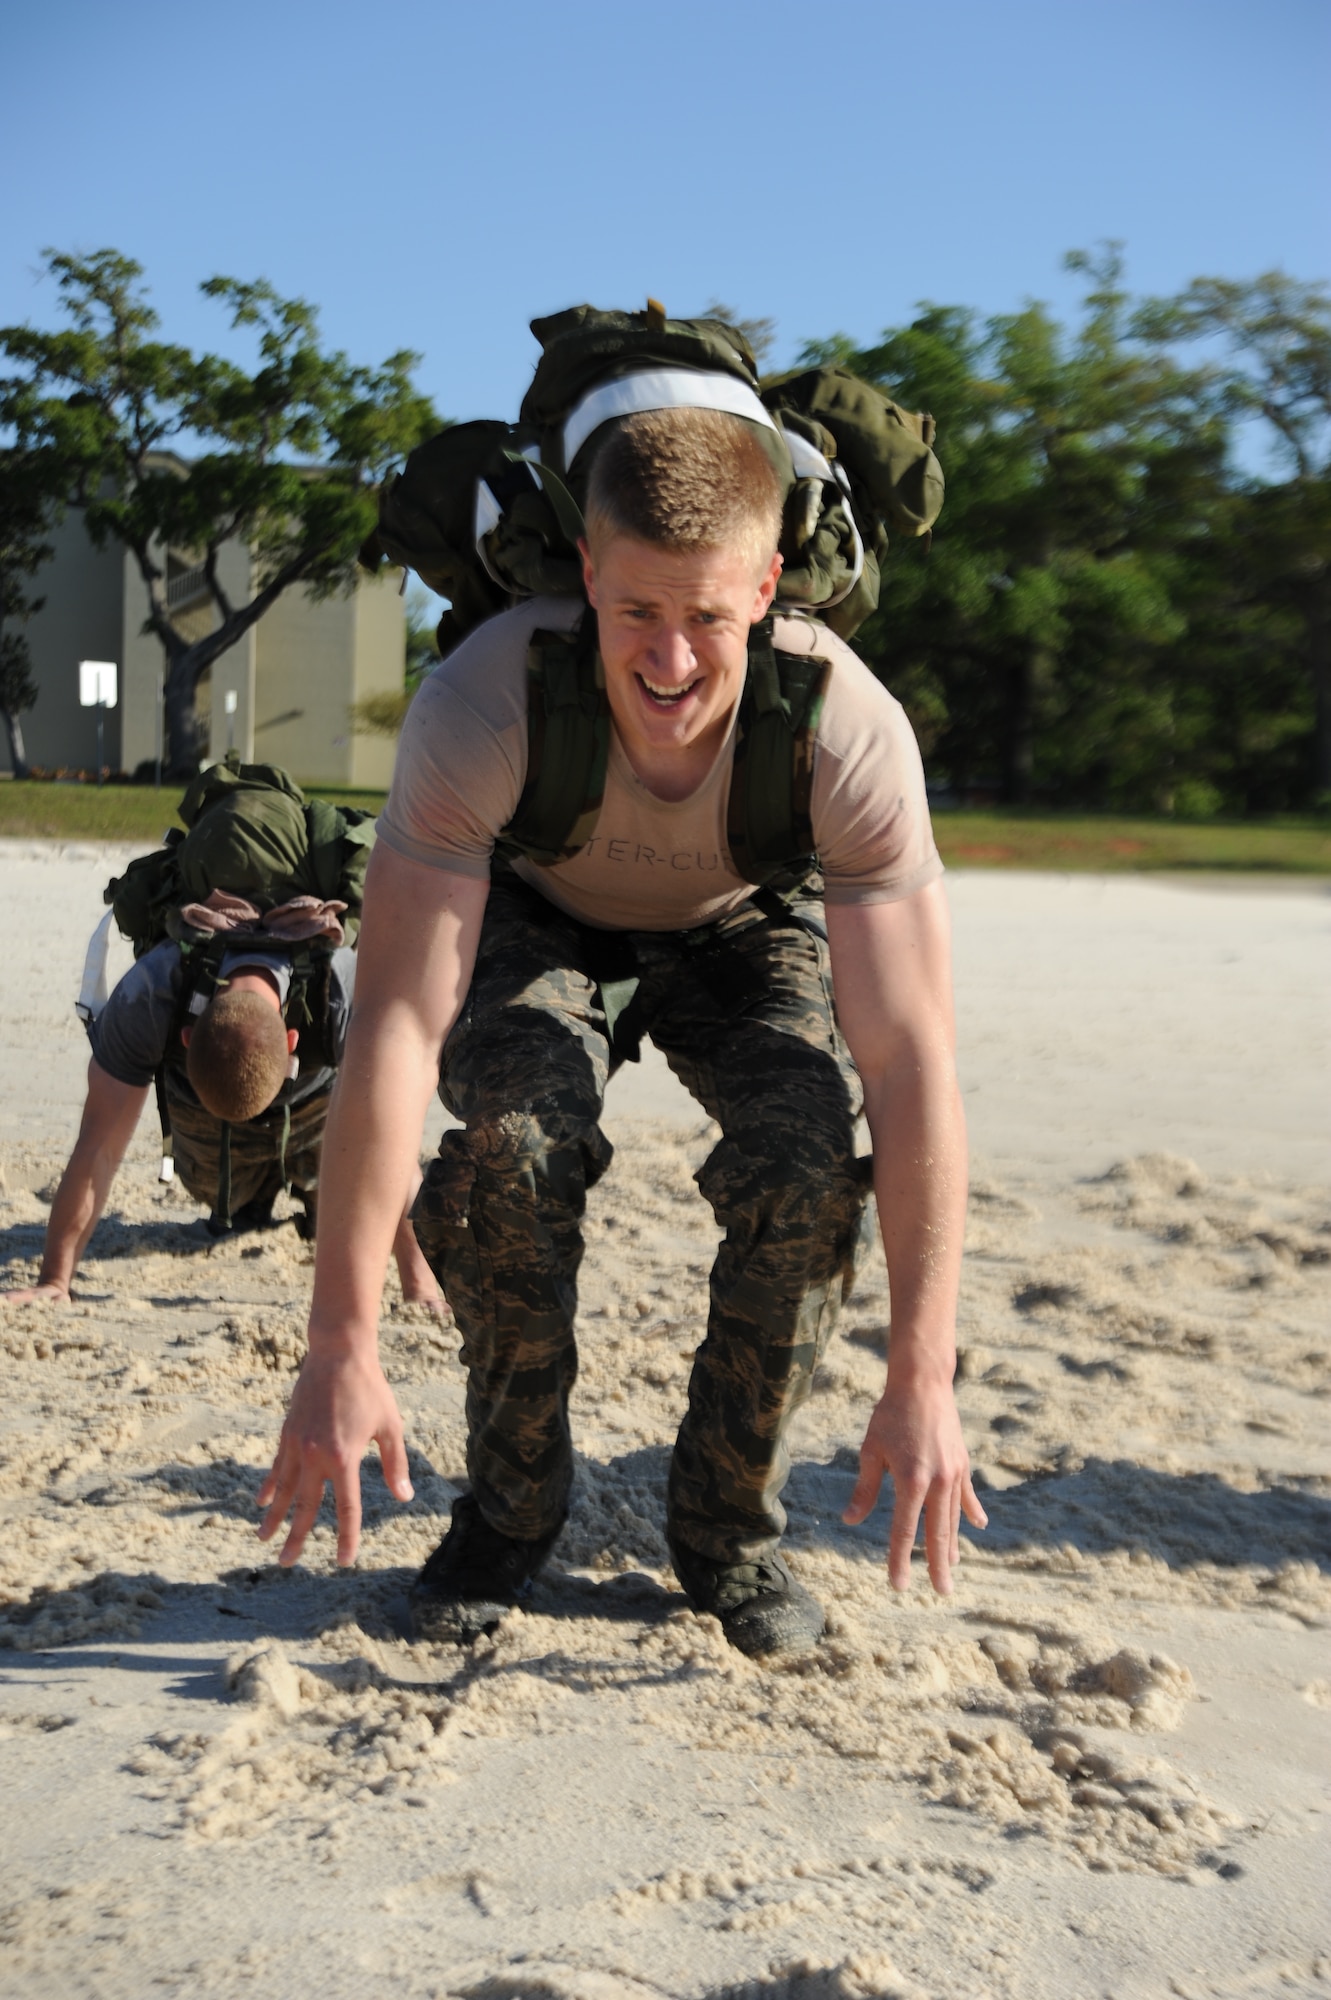 Airman Bailey Quitter-Cuff, 334th Training Squadron, does an exercise during the combat controllers’ physical training session April 12, 2013, on Biloxi beach.  Combat controllers are ground troops who are embedded with special forces teams and provide close-air support for special forces units. While at Keesler, trainees learn how to run, swim, carry a rucksack and conduct air traffic control. These Airmen are prepared physically and mentally for the demands of the combat controller pipeline while earning air traffic control certification in just 15 weeks.  (U.S. Air Force photo by 2nd Lt. Michael Alvarez)